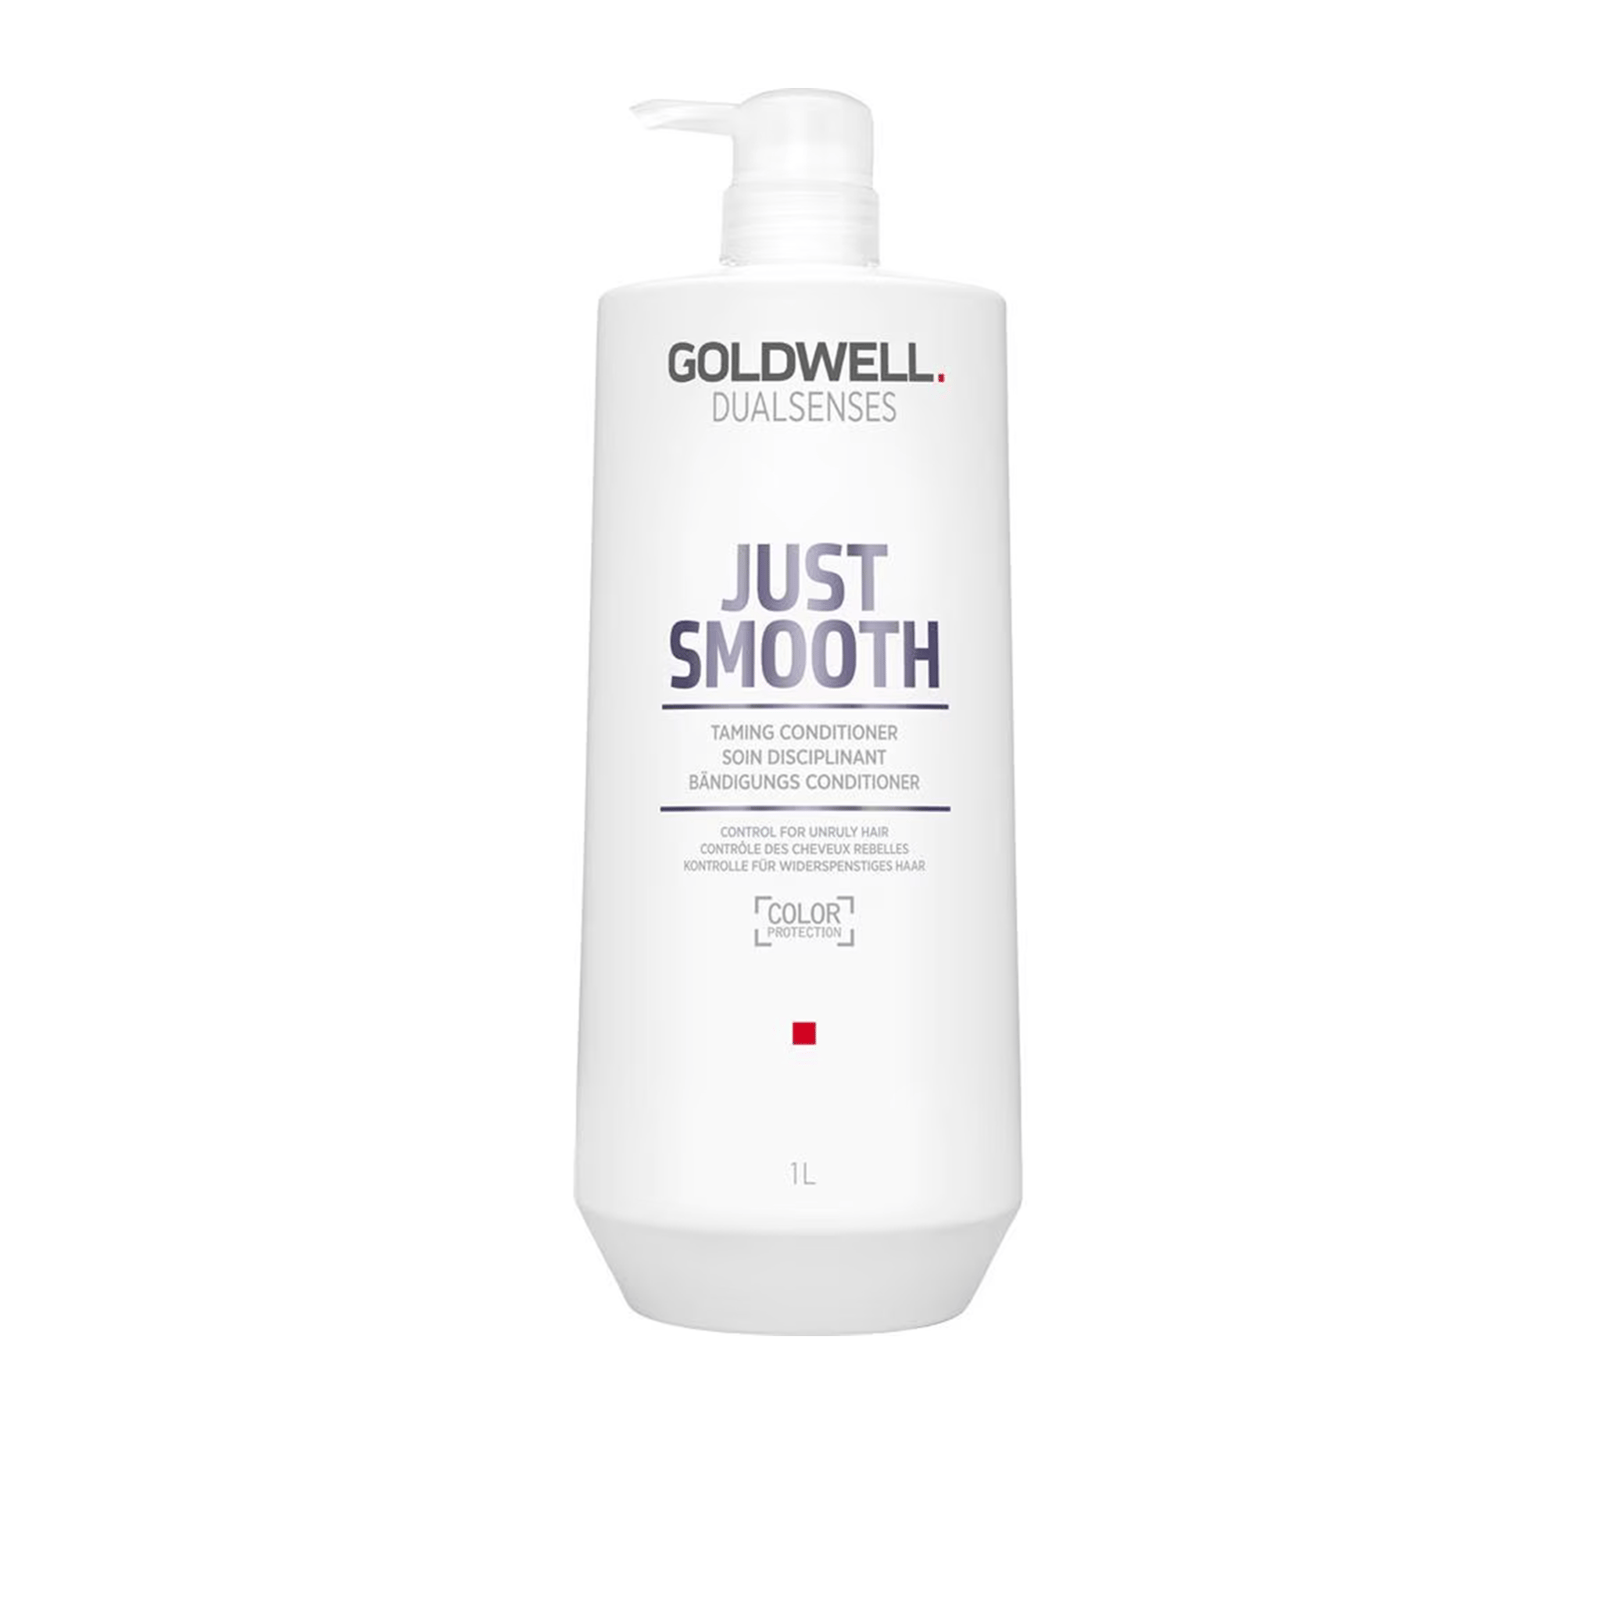 Goldwell Dualsenses Just Smooth Taming Conditioner 1L